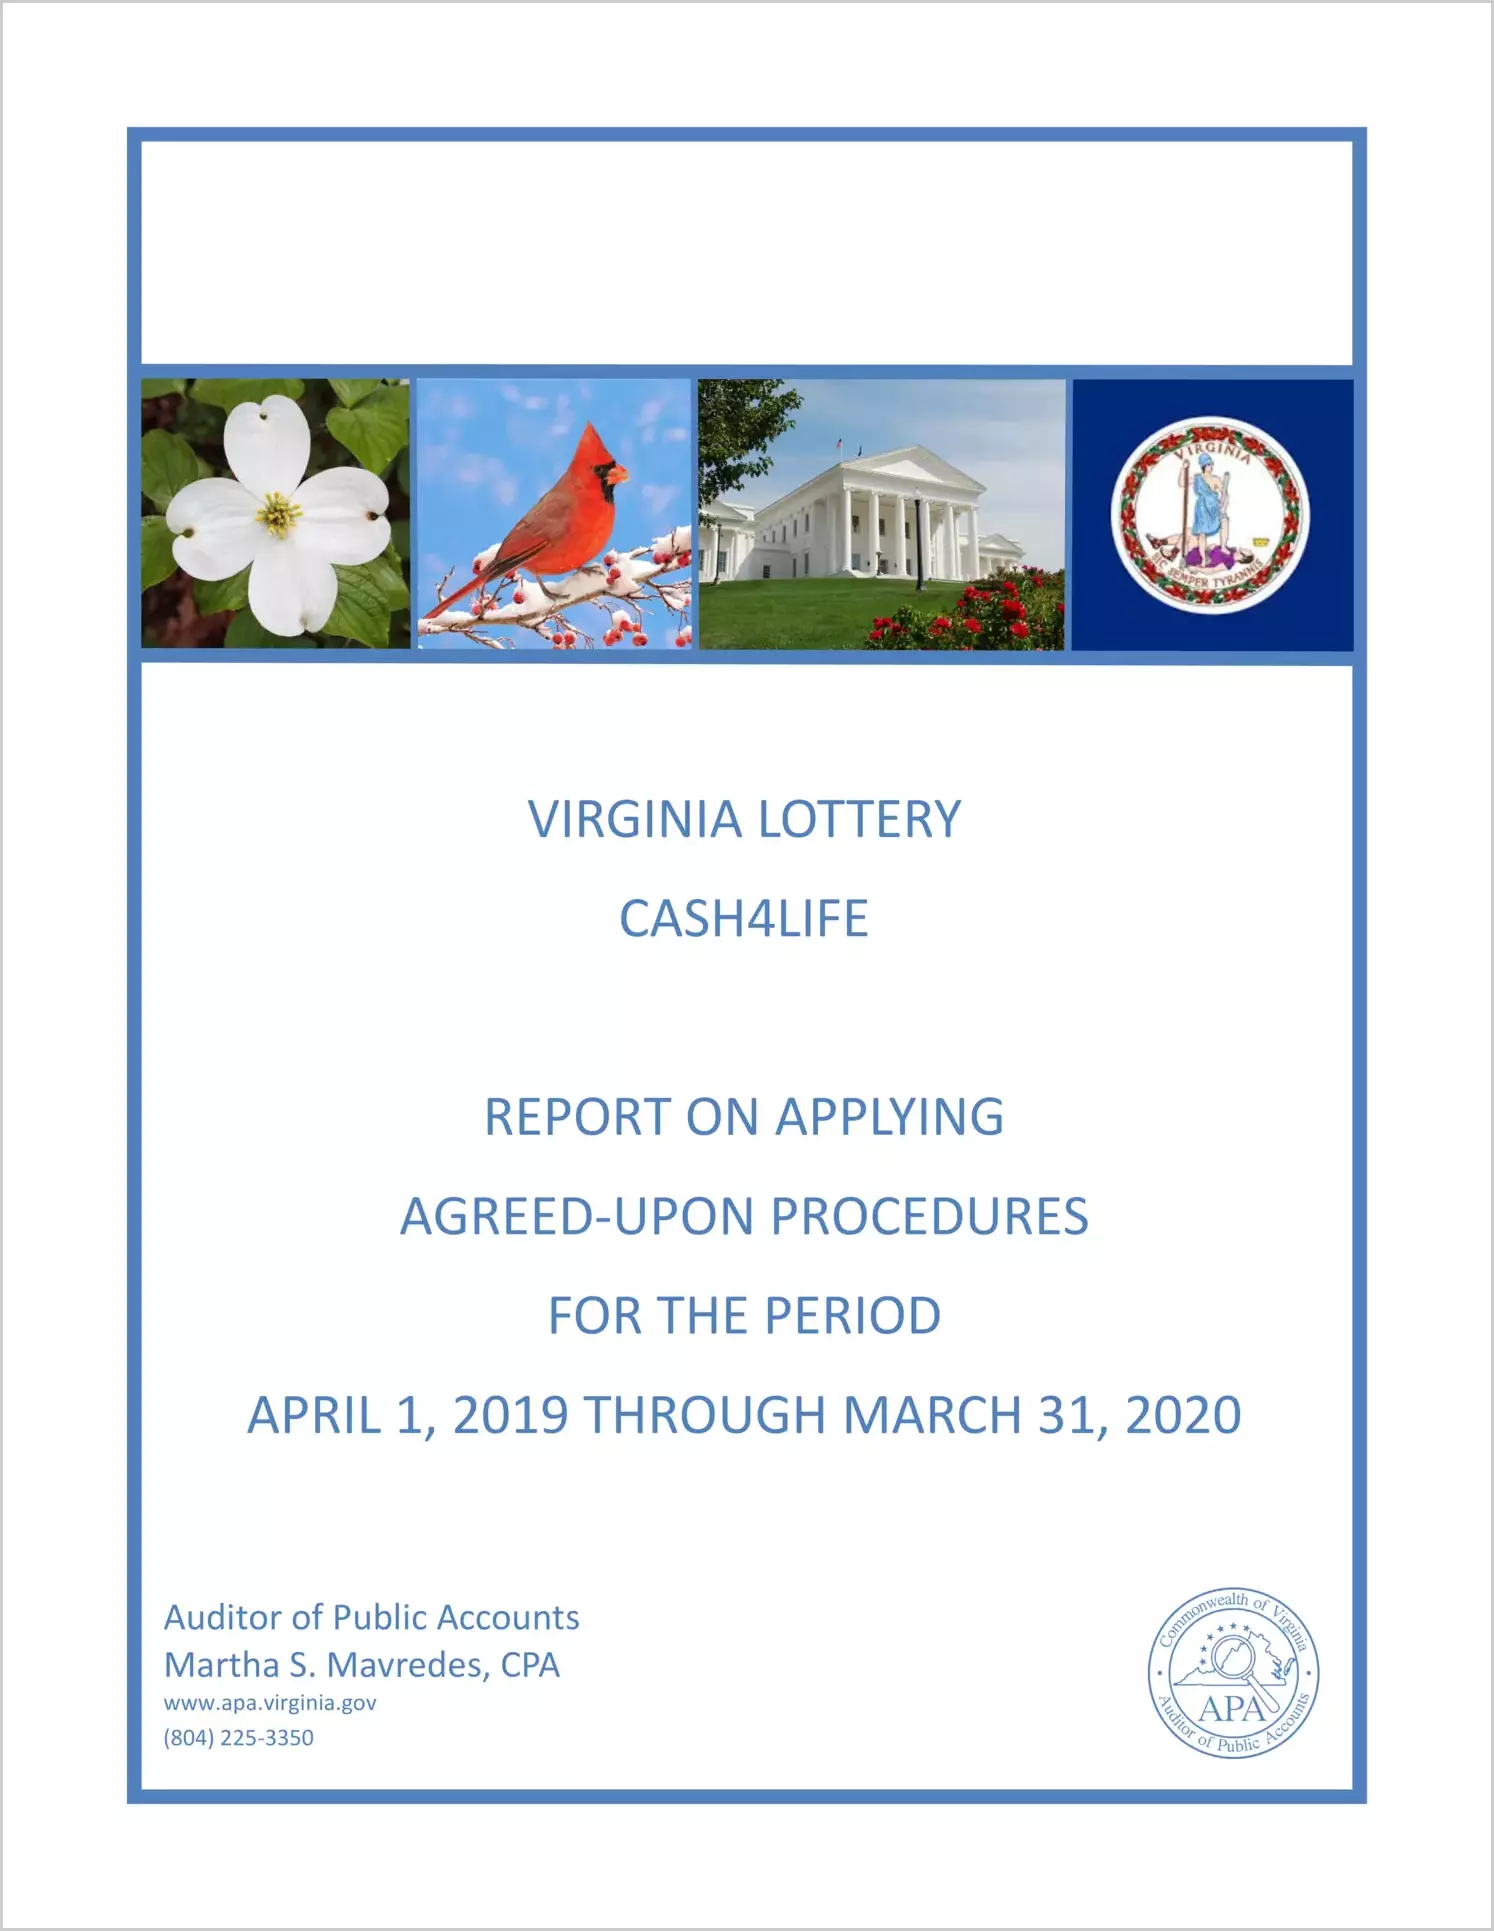 Virginia Lottery Cash4Life Report on Applying Agreed-Upon Procedures for the period April 1, 2019 through March 31, 2020